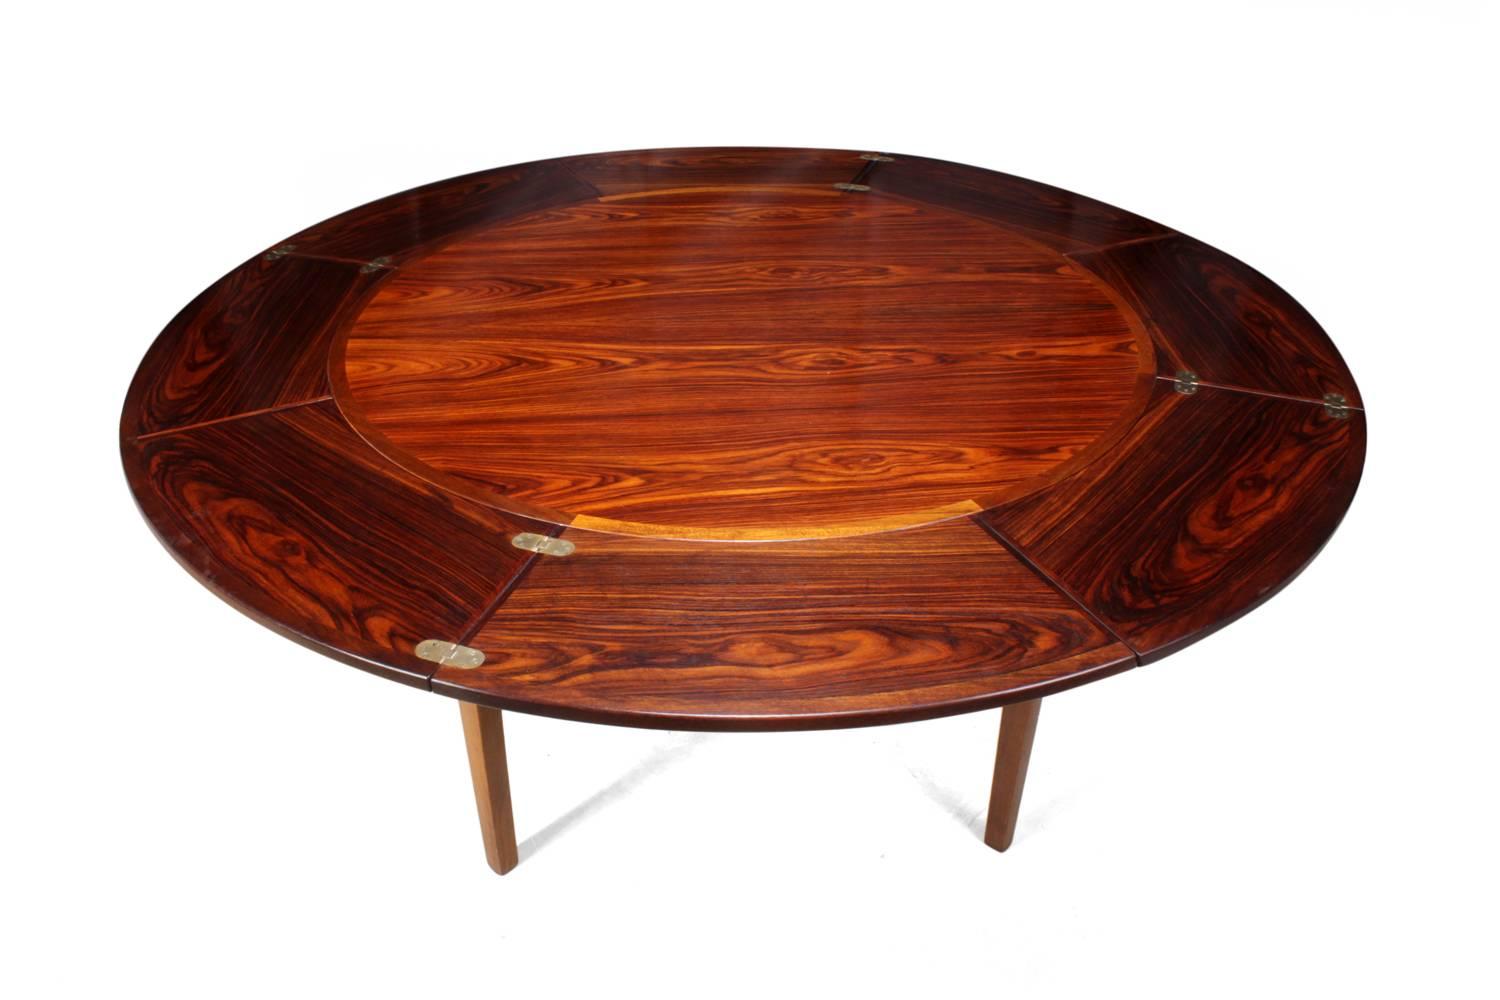 Rosewood flip flap lotus table by Dyrlund
A Danish rosewood dining table by Dyrlund with flip flap extension leaves that neatly slide underneath this table will seat four in closed position but with leaves out this will seat eight the table is in